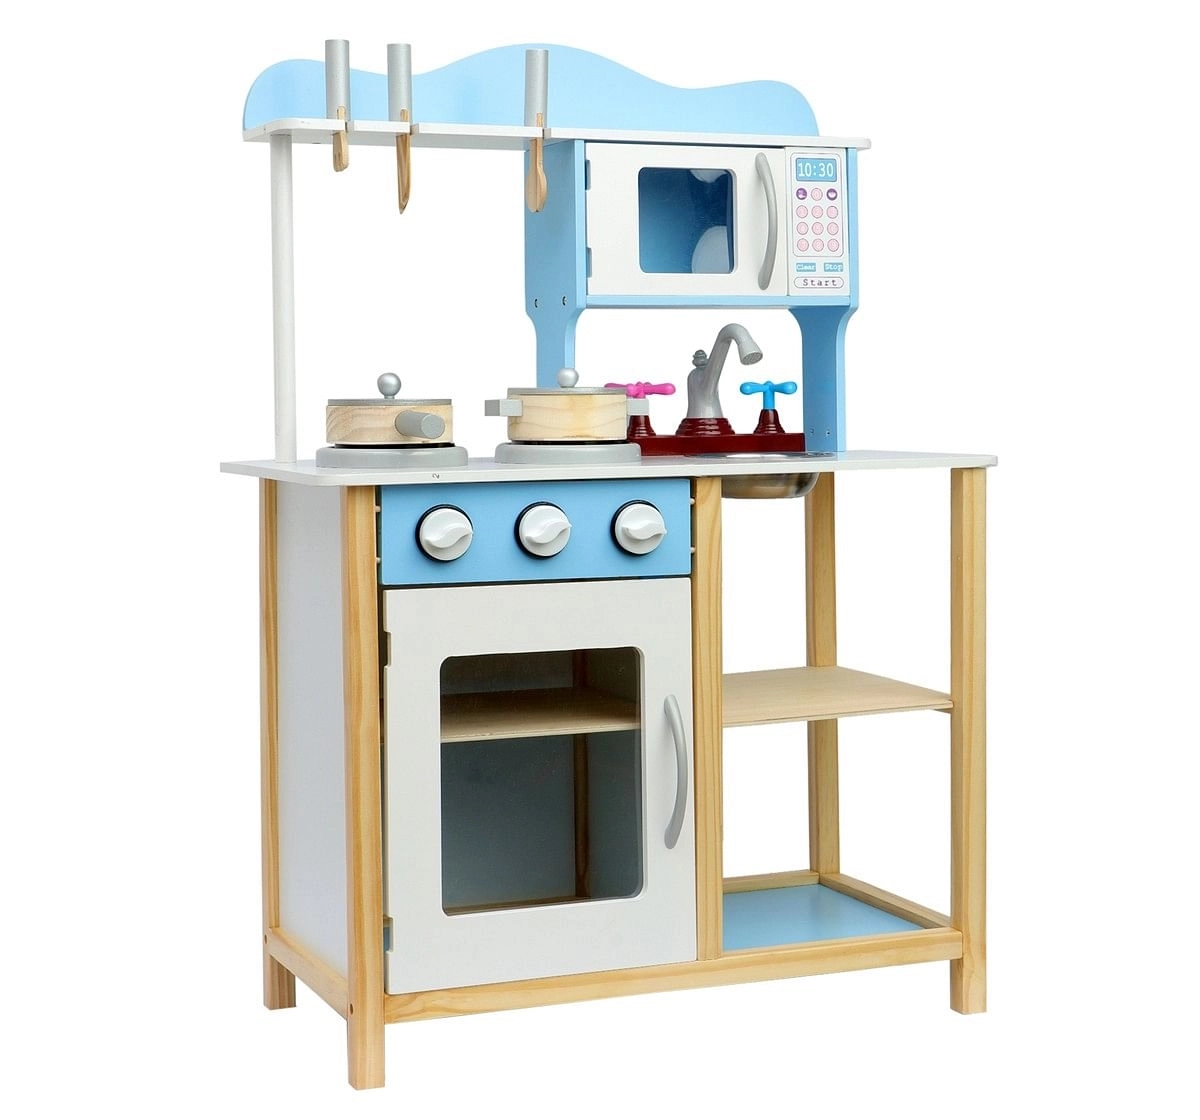 Wooden Blue Kitchen with Accessories, Multicolour 3Y+